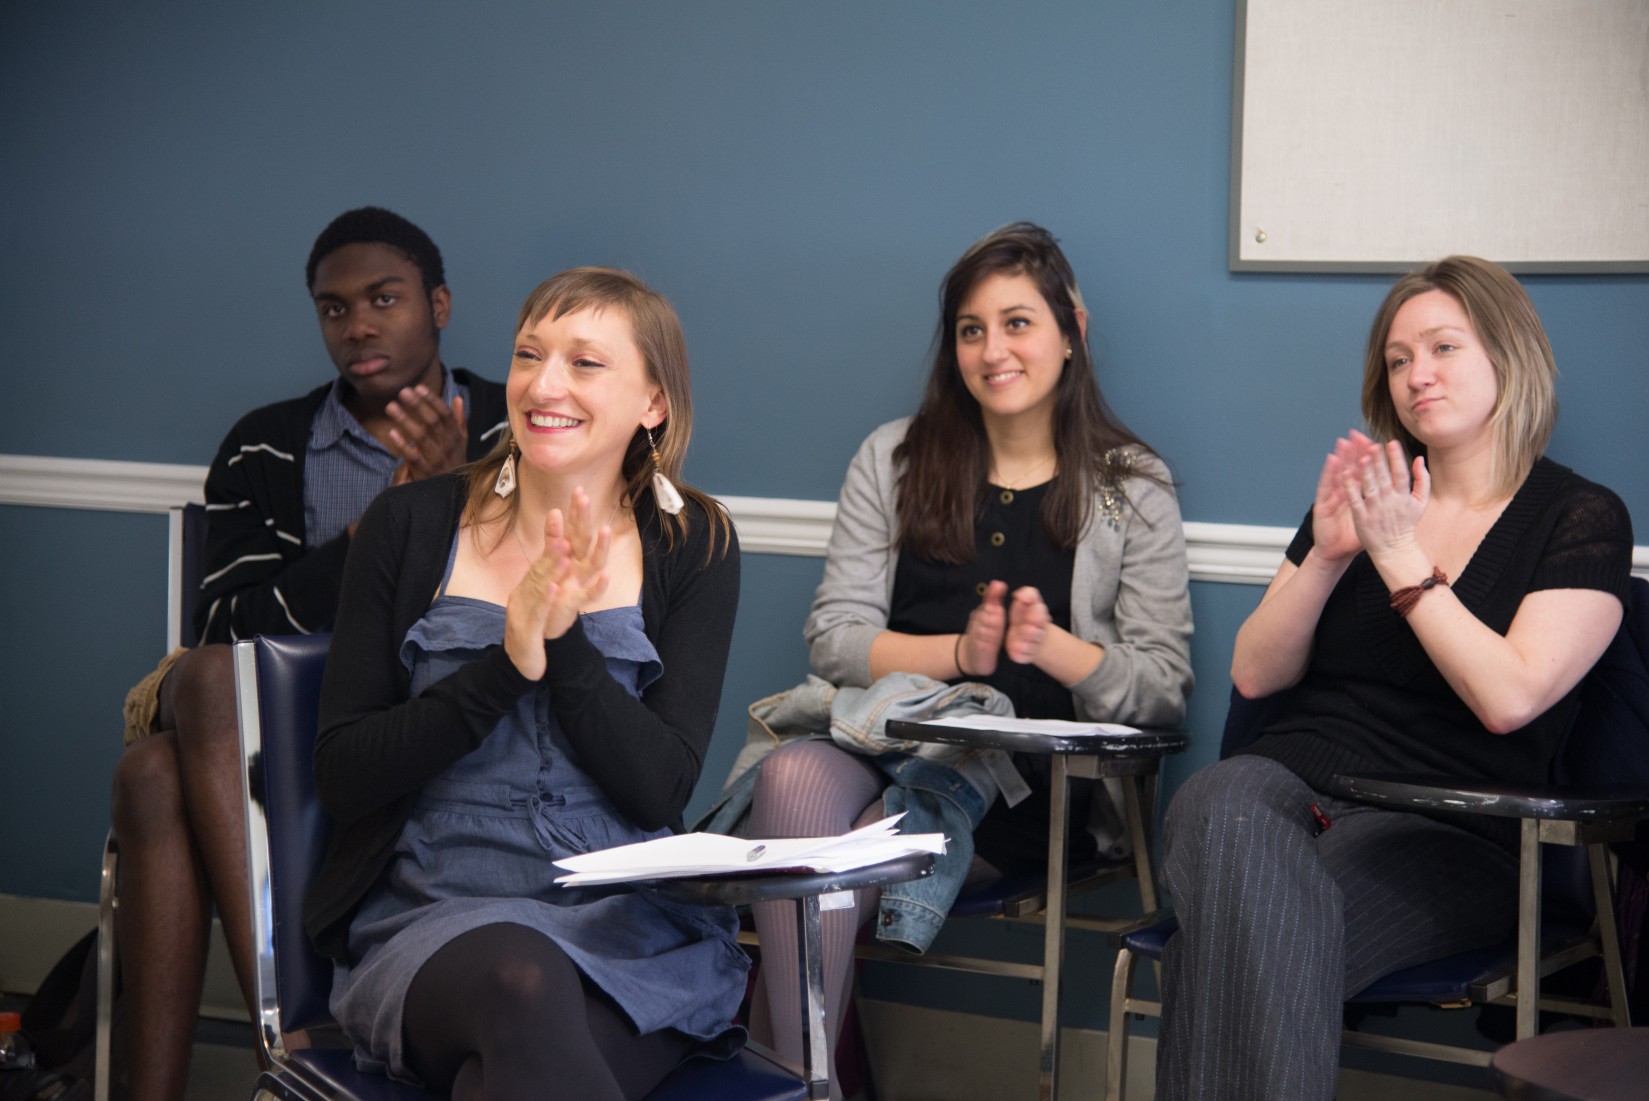 French professor Julie Huntington (foreground) and her students listen to a presentation